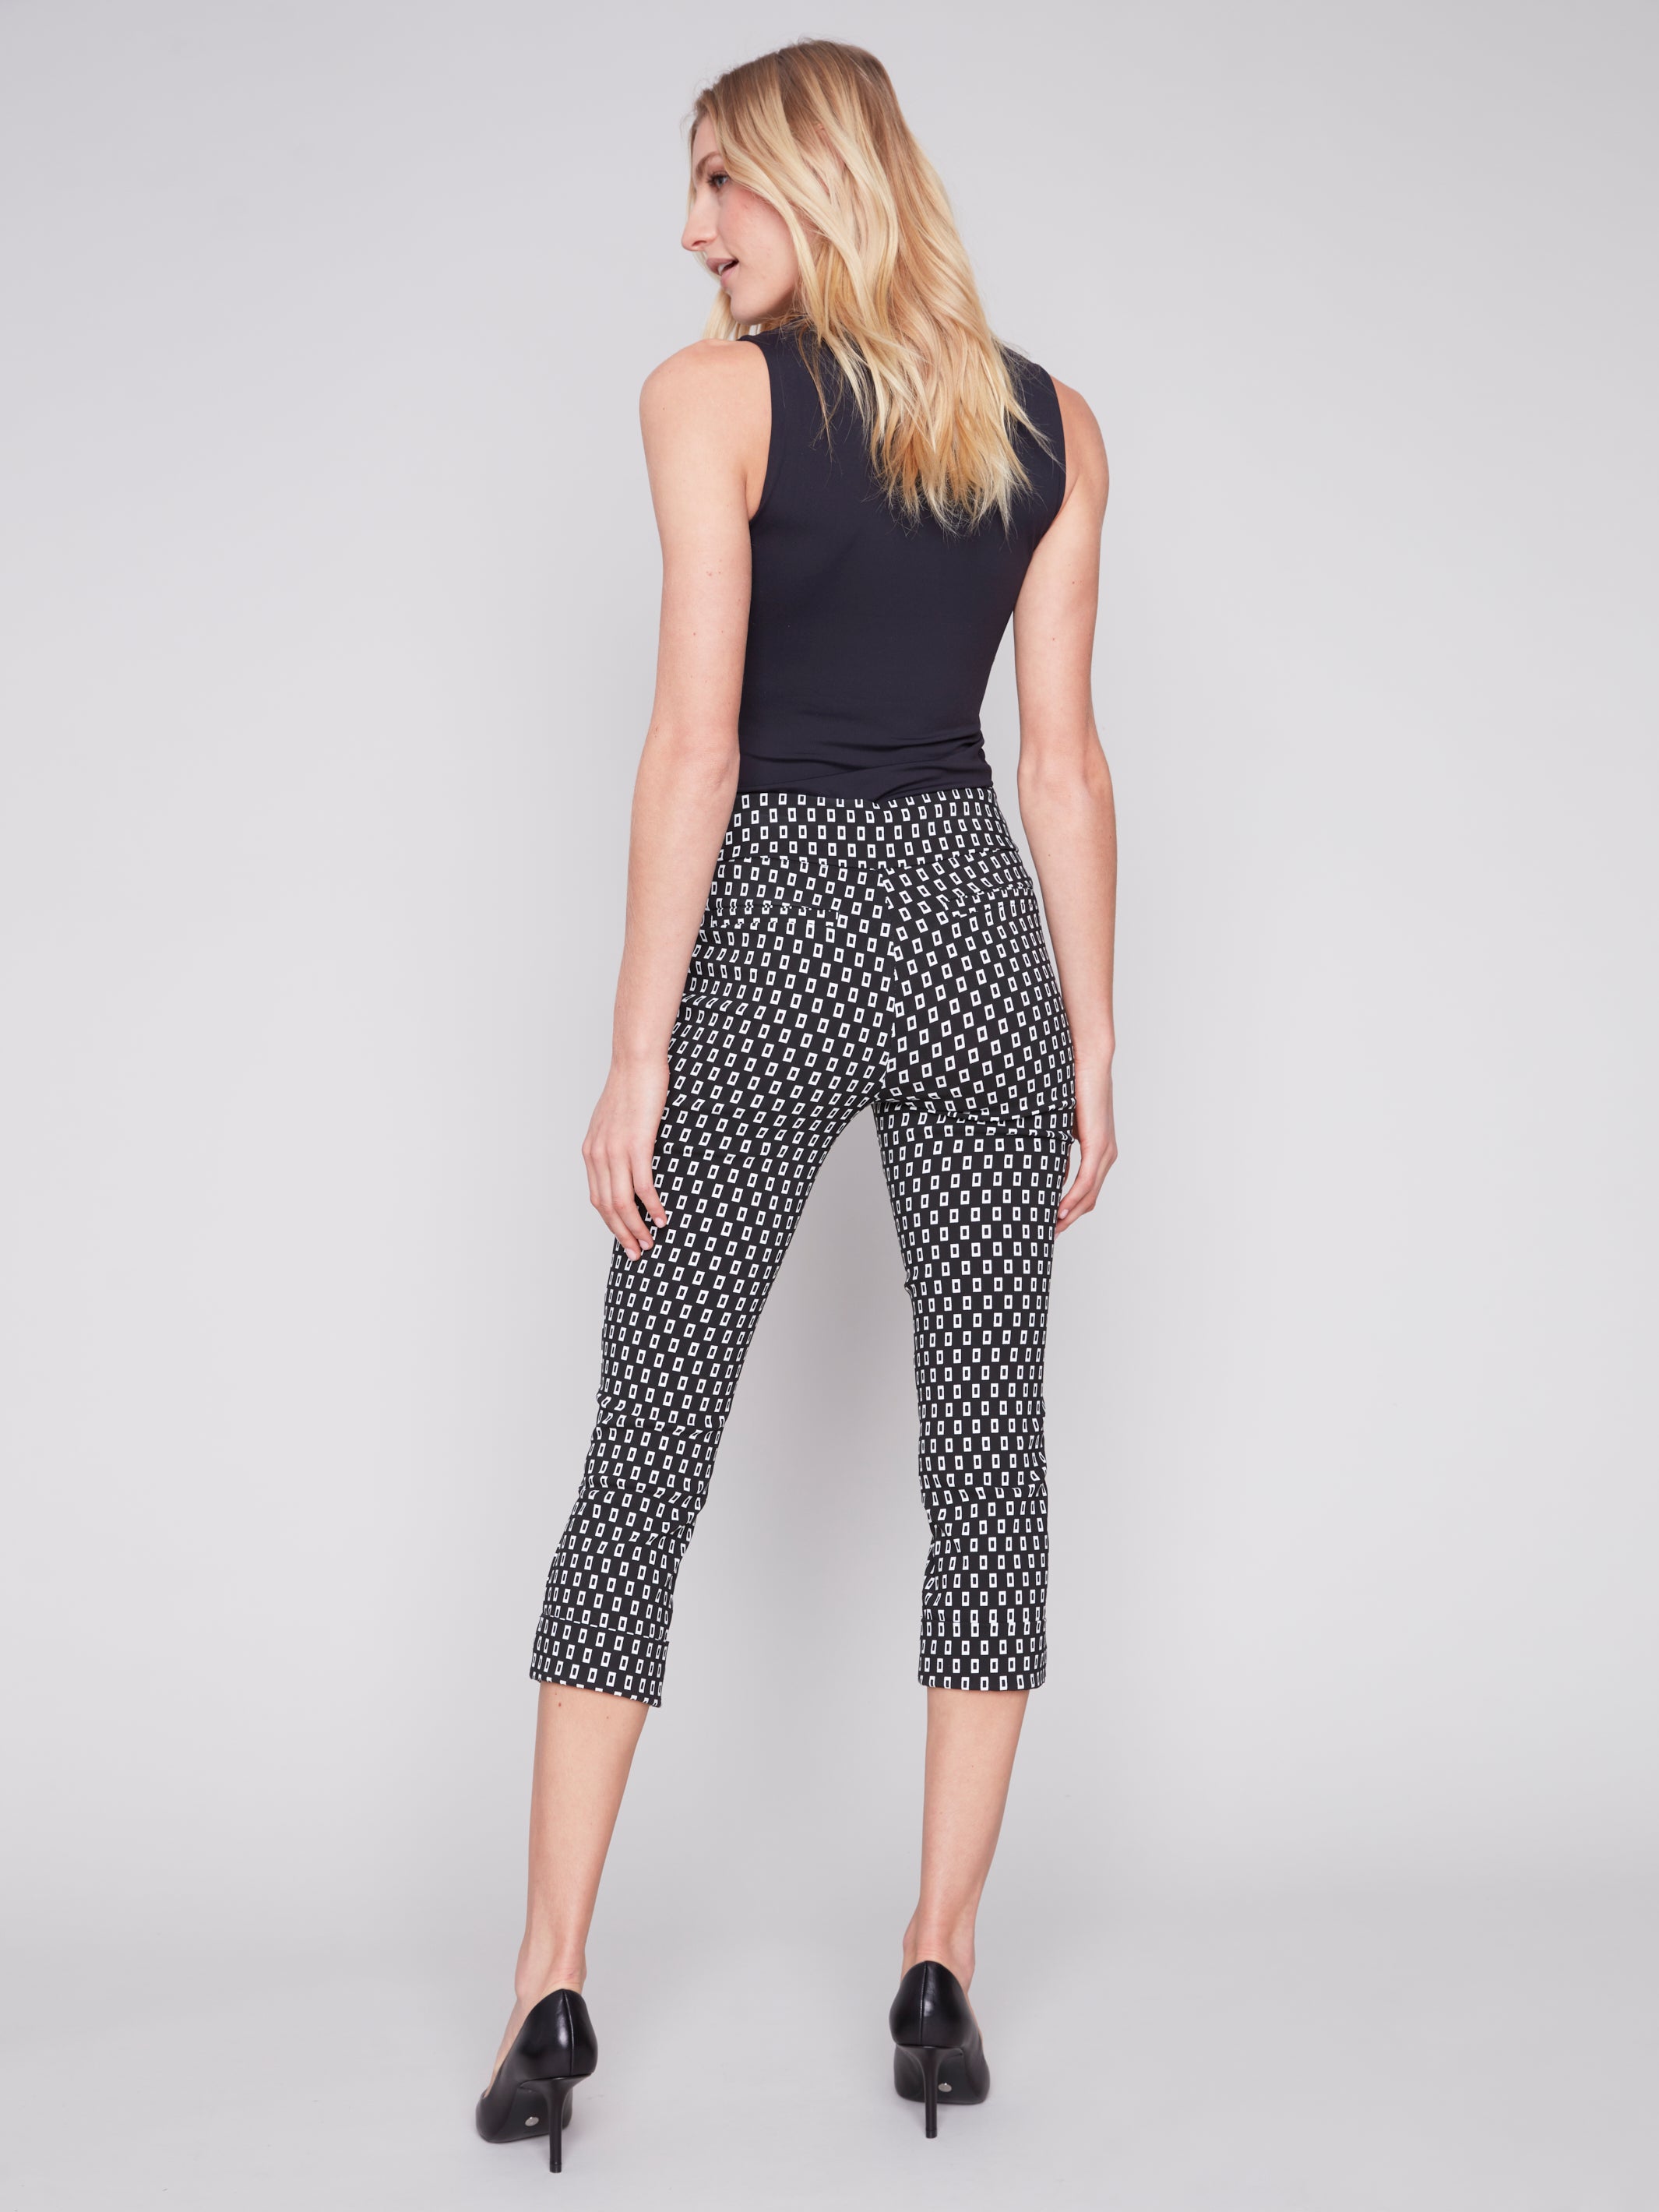 Pull On Cropped Cuffed Pants by Charlie B